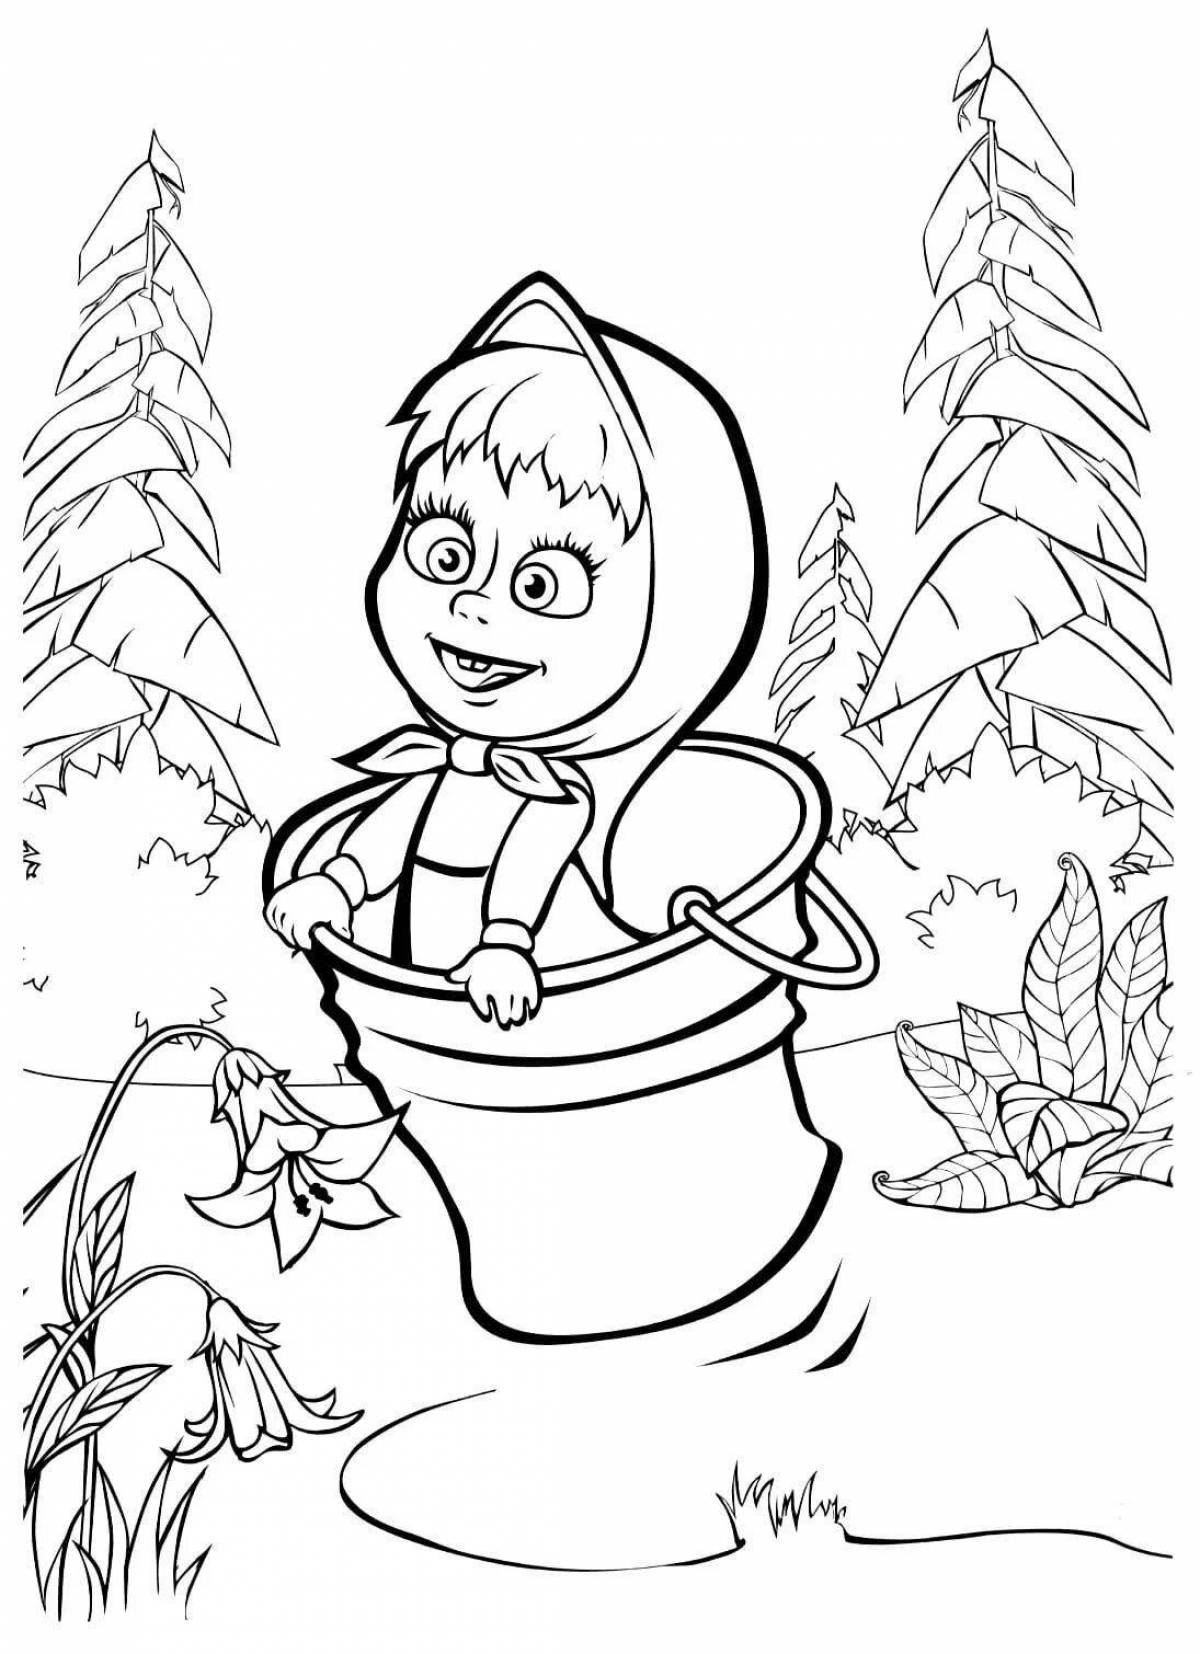 Colored Masha and the bear coloring book